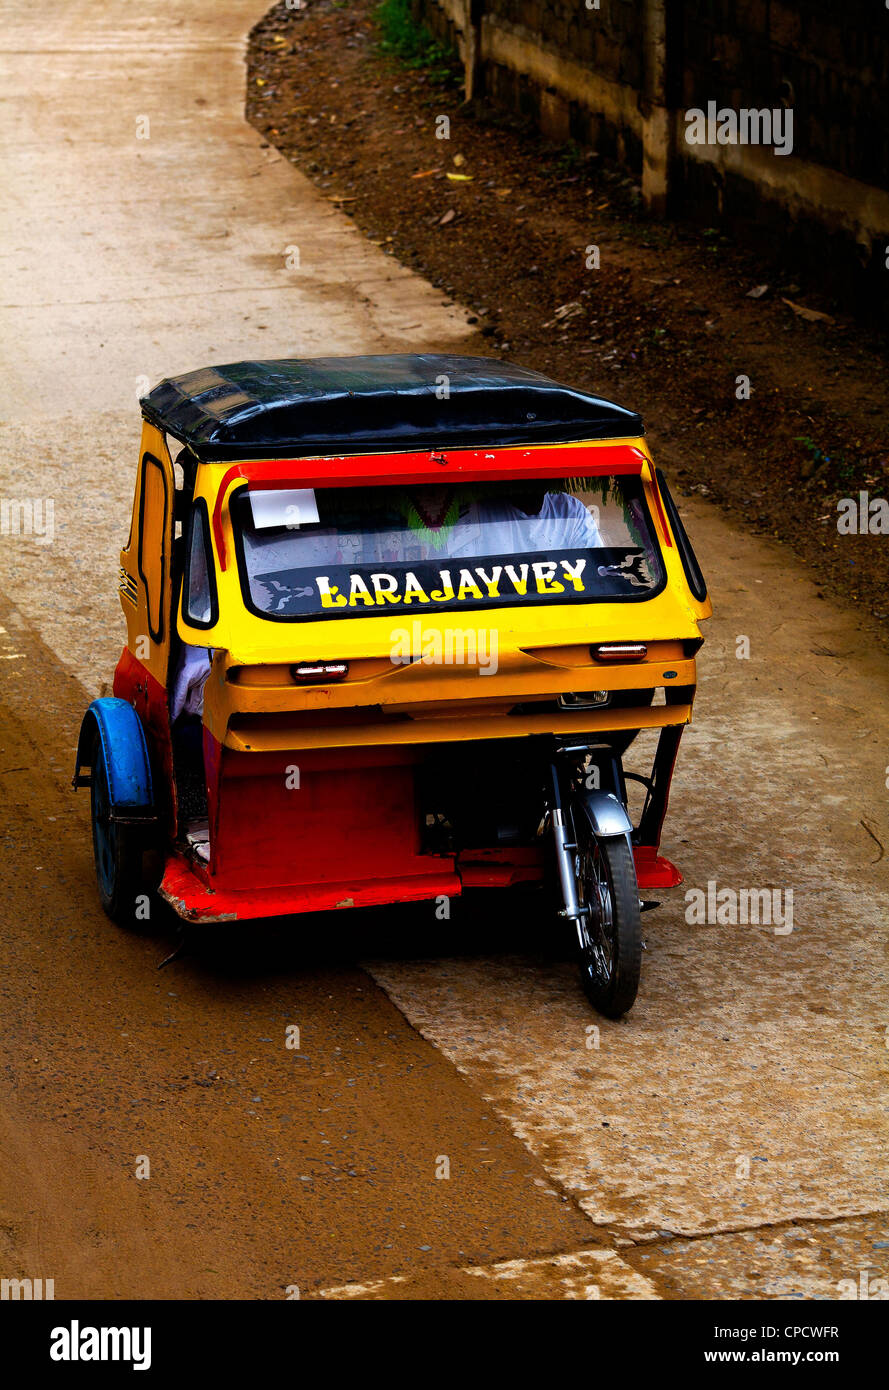 A yellow and red tricycle taxi speeds down the main street of the town of El Nido on the island of Palawan in the Philippines. Stock Photo